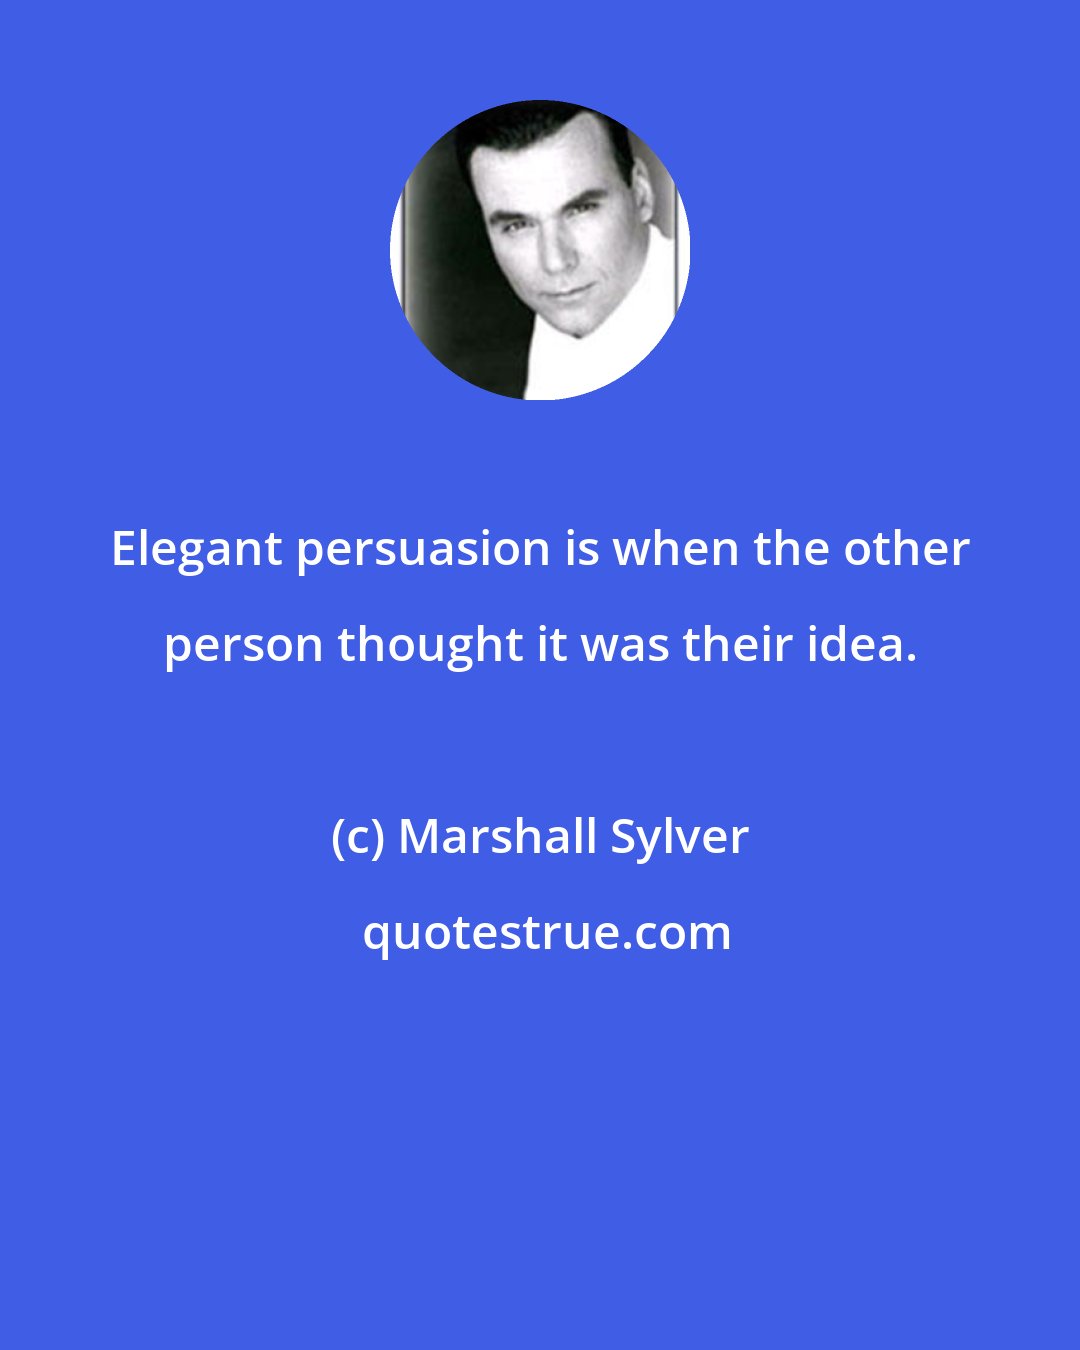 Marshall Sylver: Elegant persuasion is when the other person thought it was their idea.